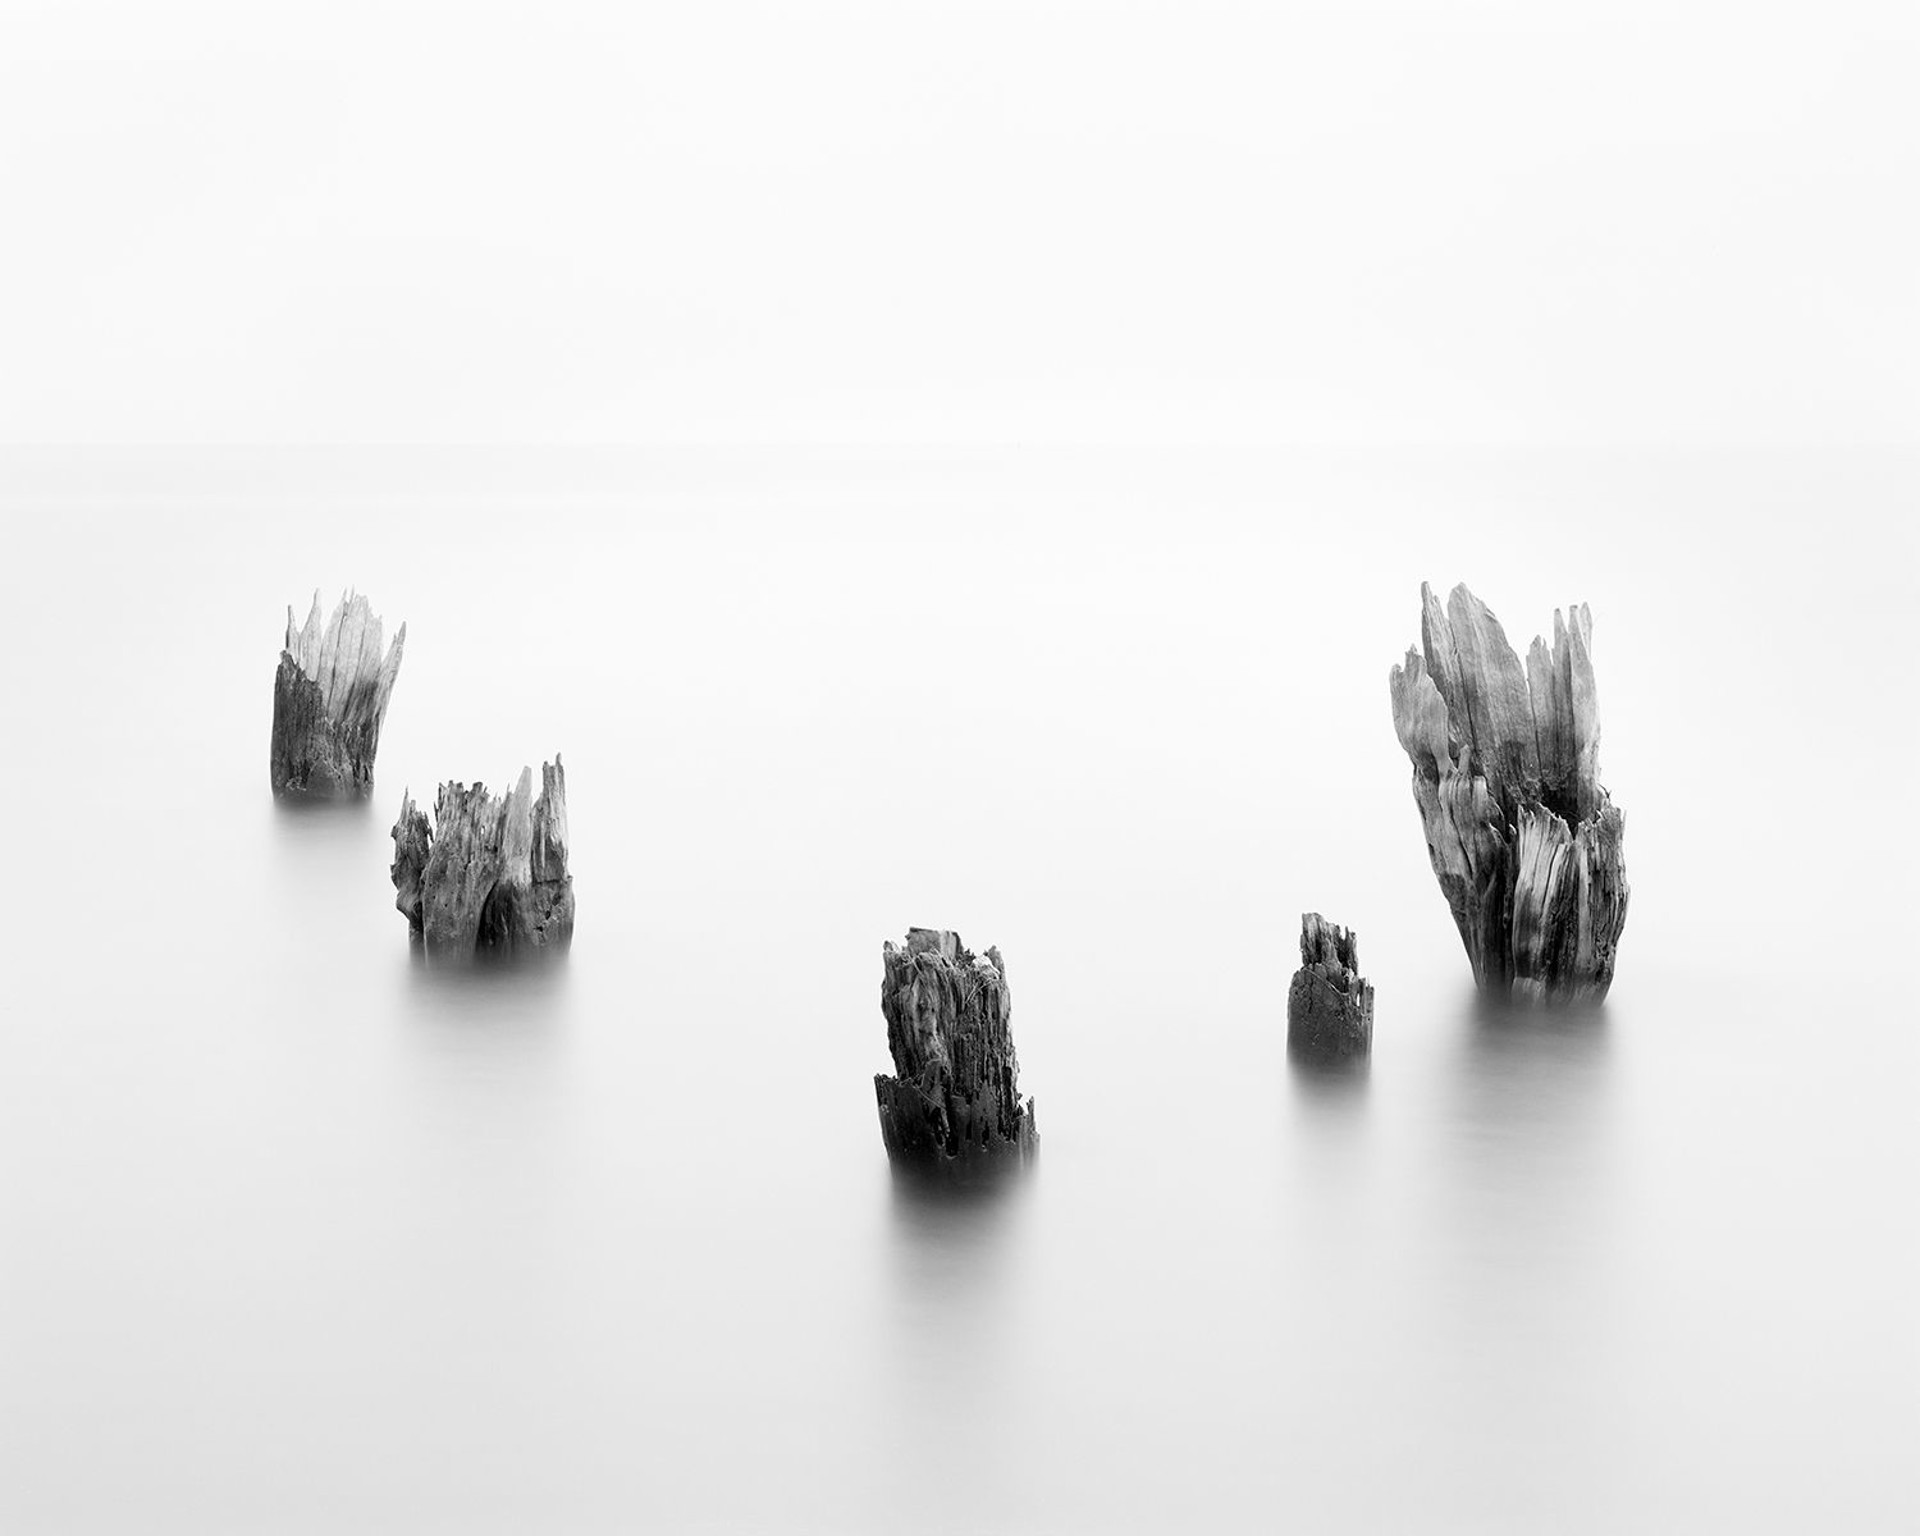 Ghost Forest XV by Mike Basher